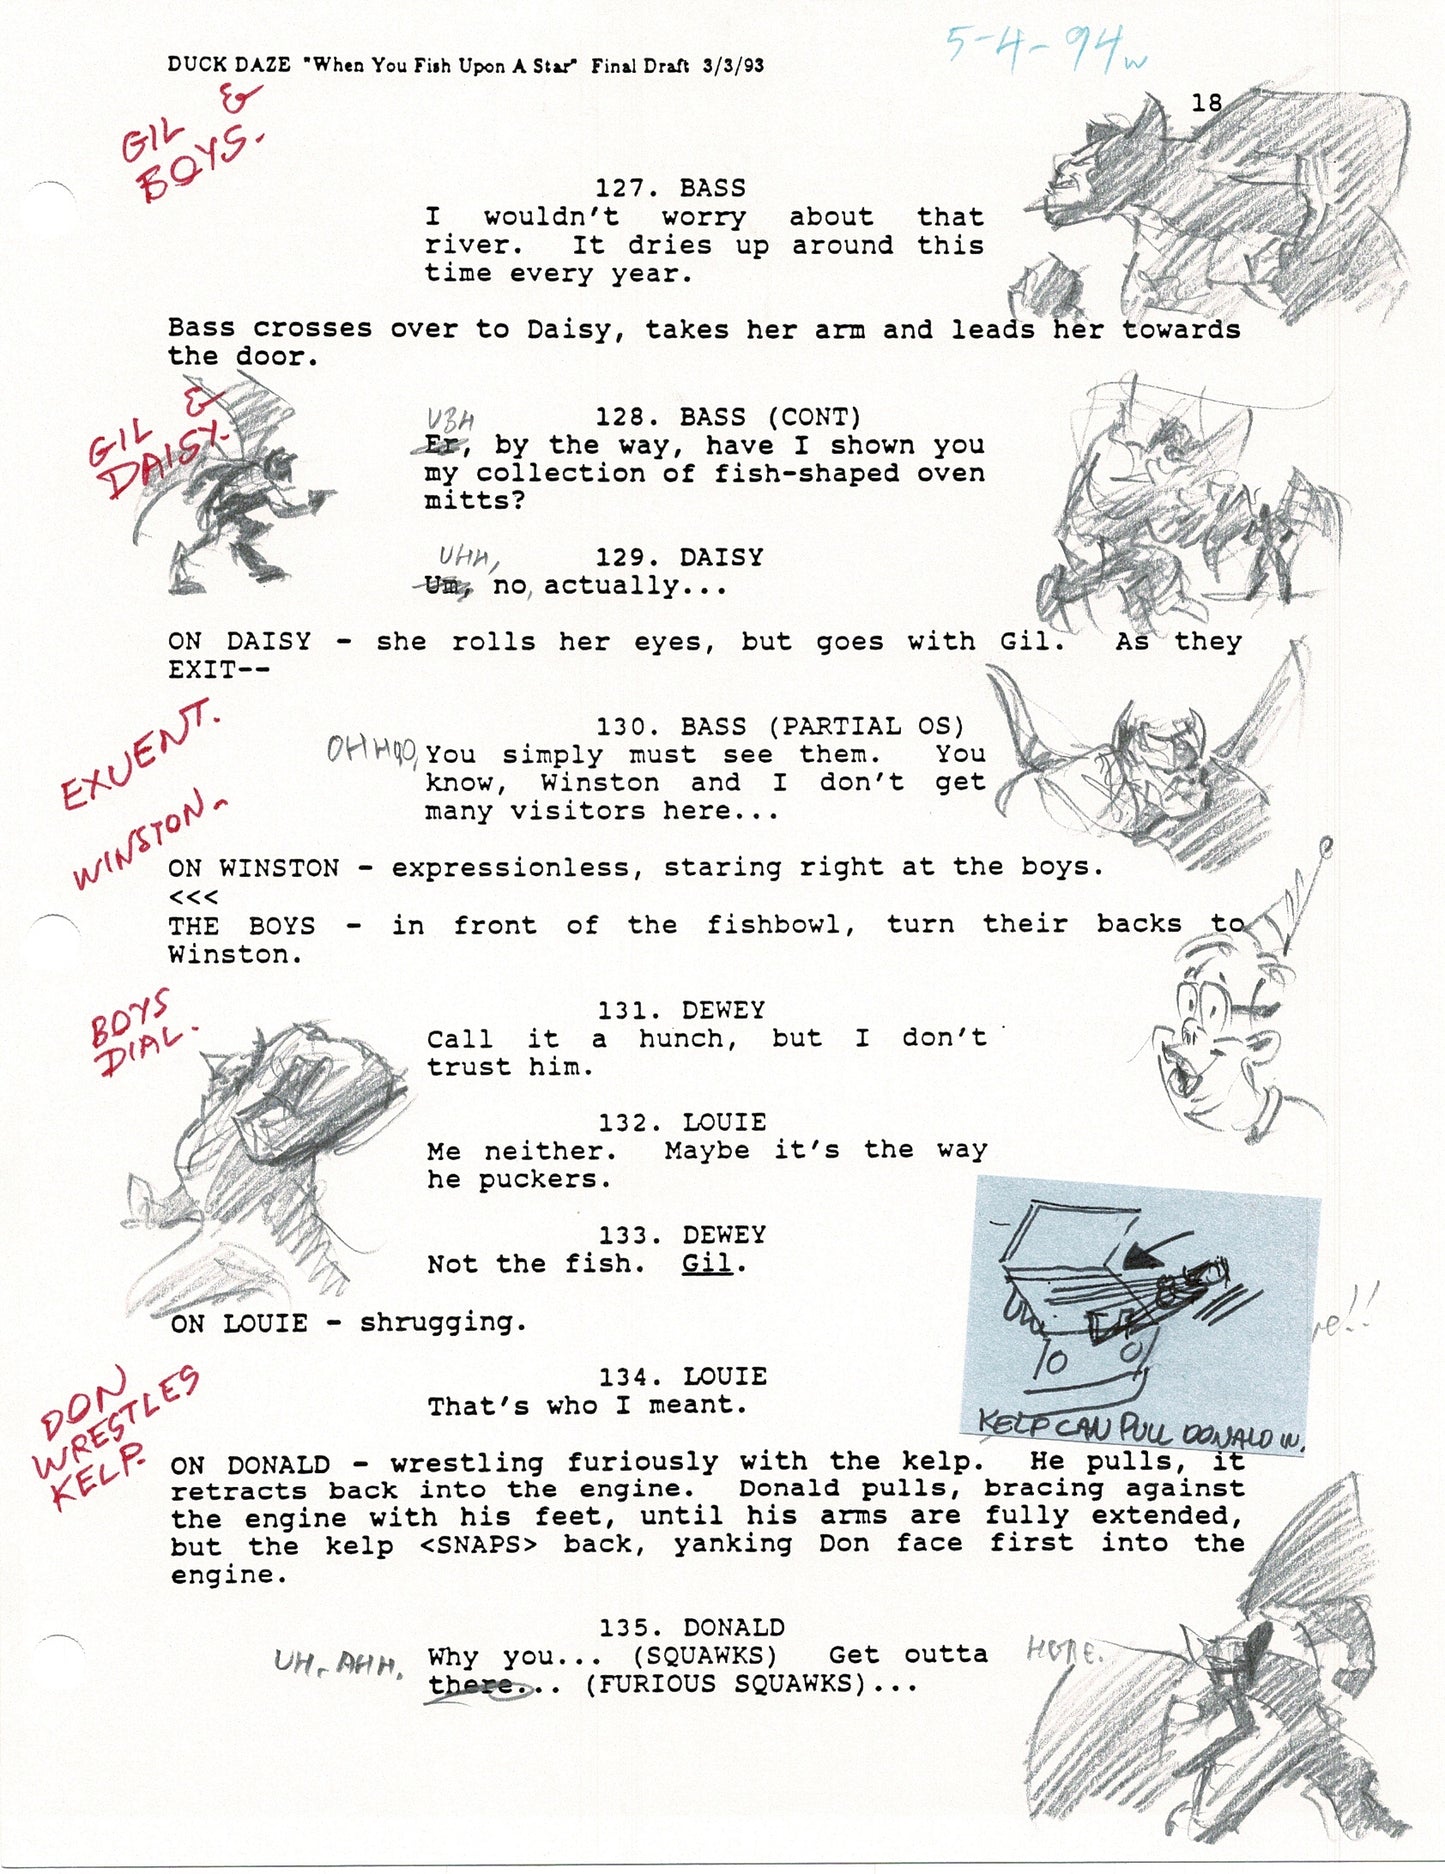 Quack Pack Disney Production Animation Script Copy WITH MANY DRAWINGS from Animator Wendell Washer's Estate 1996 wus